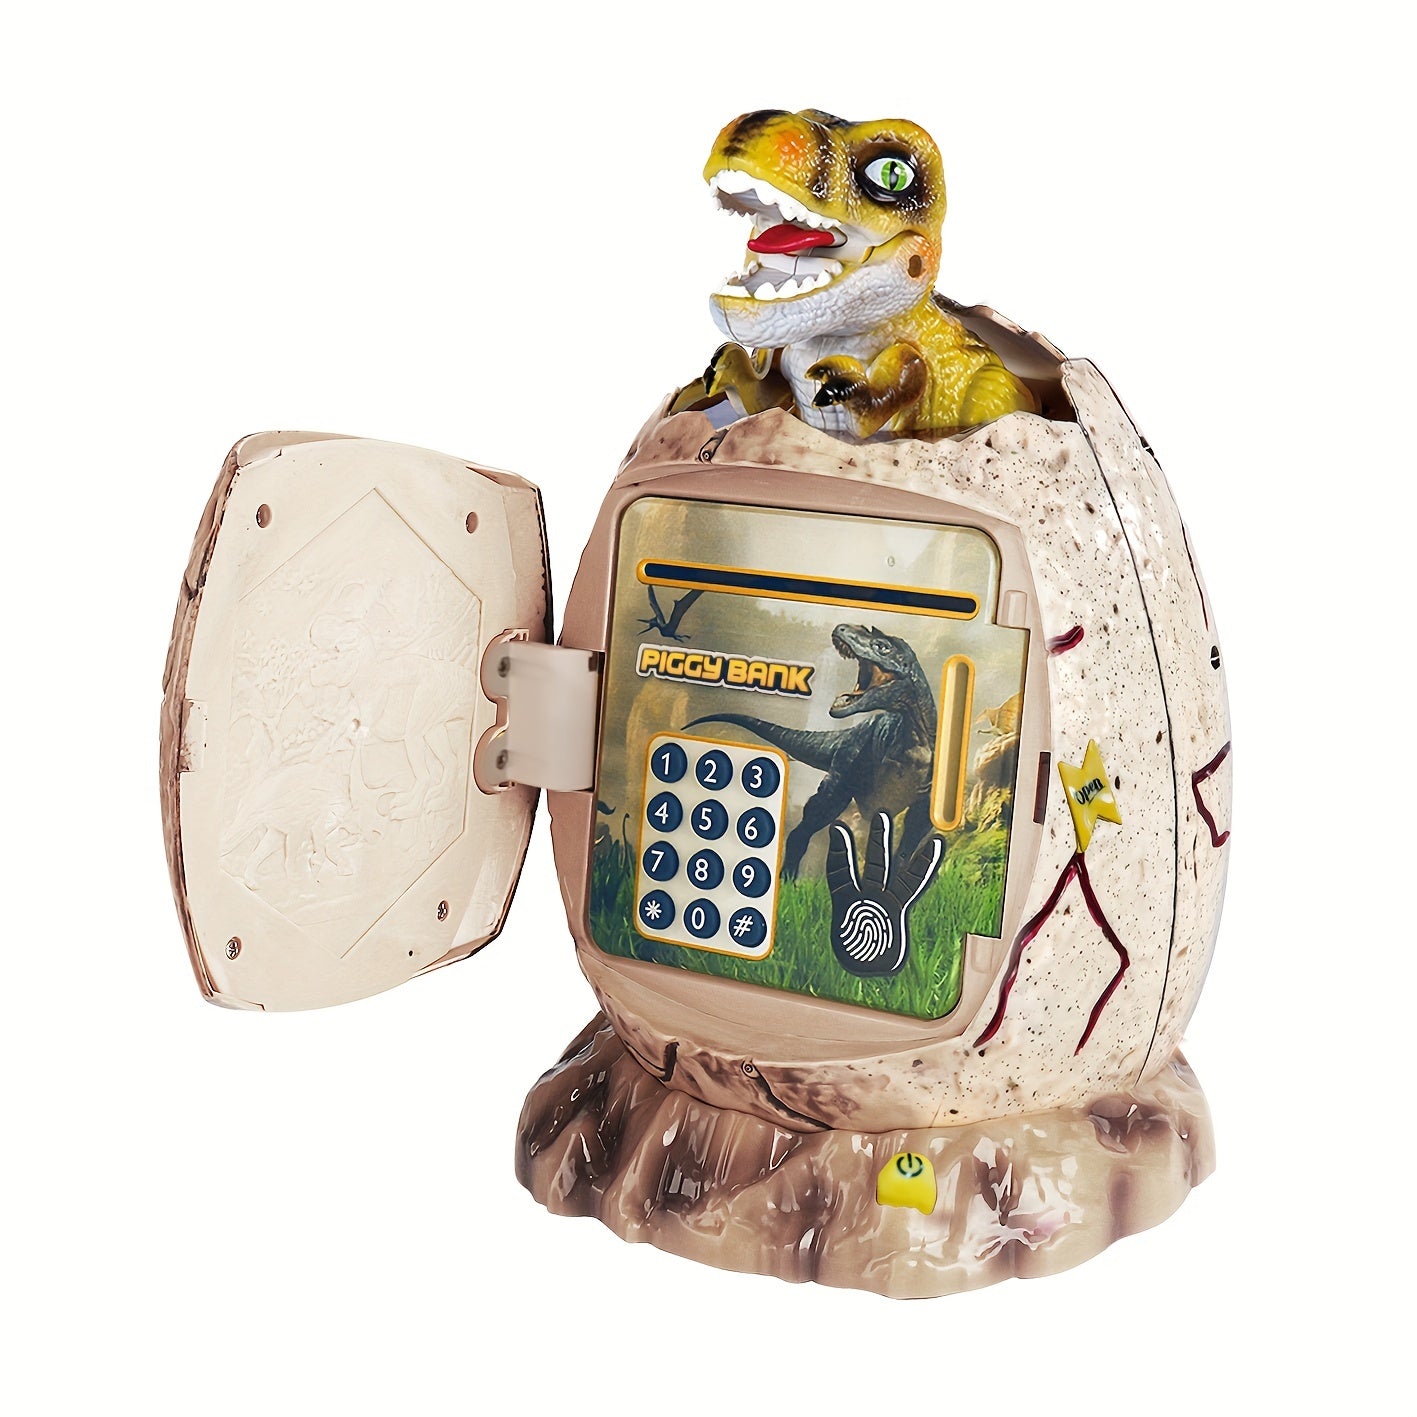 Dinosaur Bank,you Need To Purchase 3*aa Batteries To Use,with Lights And Music,setting Passwords For Greater Security,initial Password 0000,equipped With A Screwdriver,it's A Good Gift,kids Toys ShopOnlyDeal